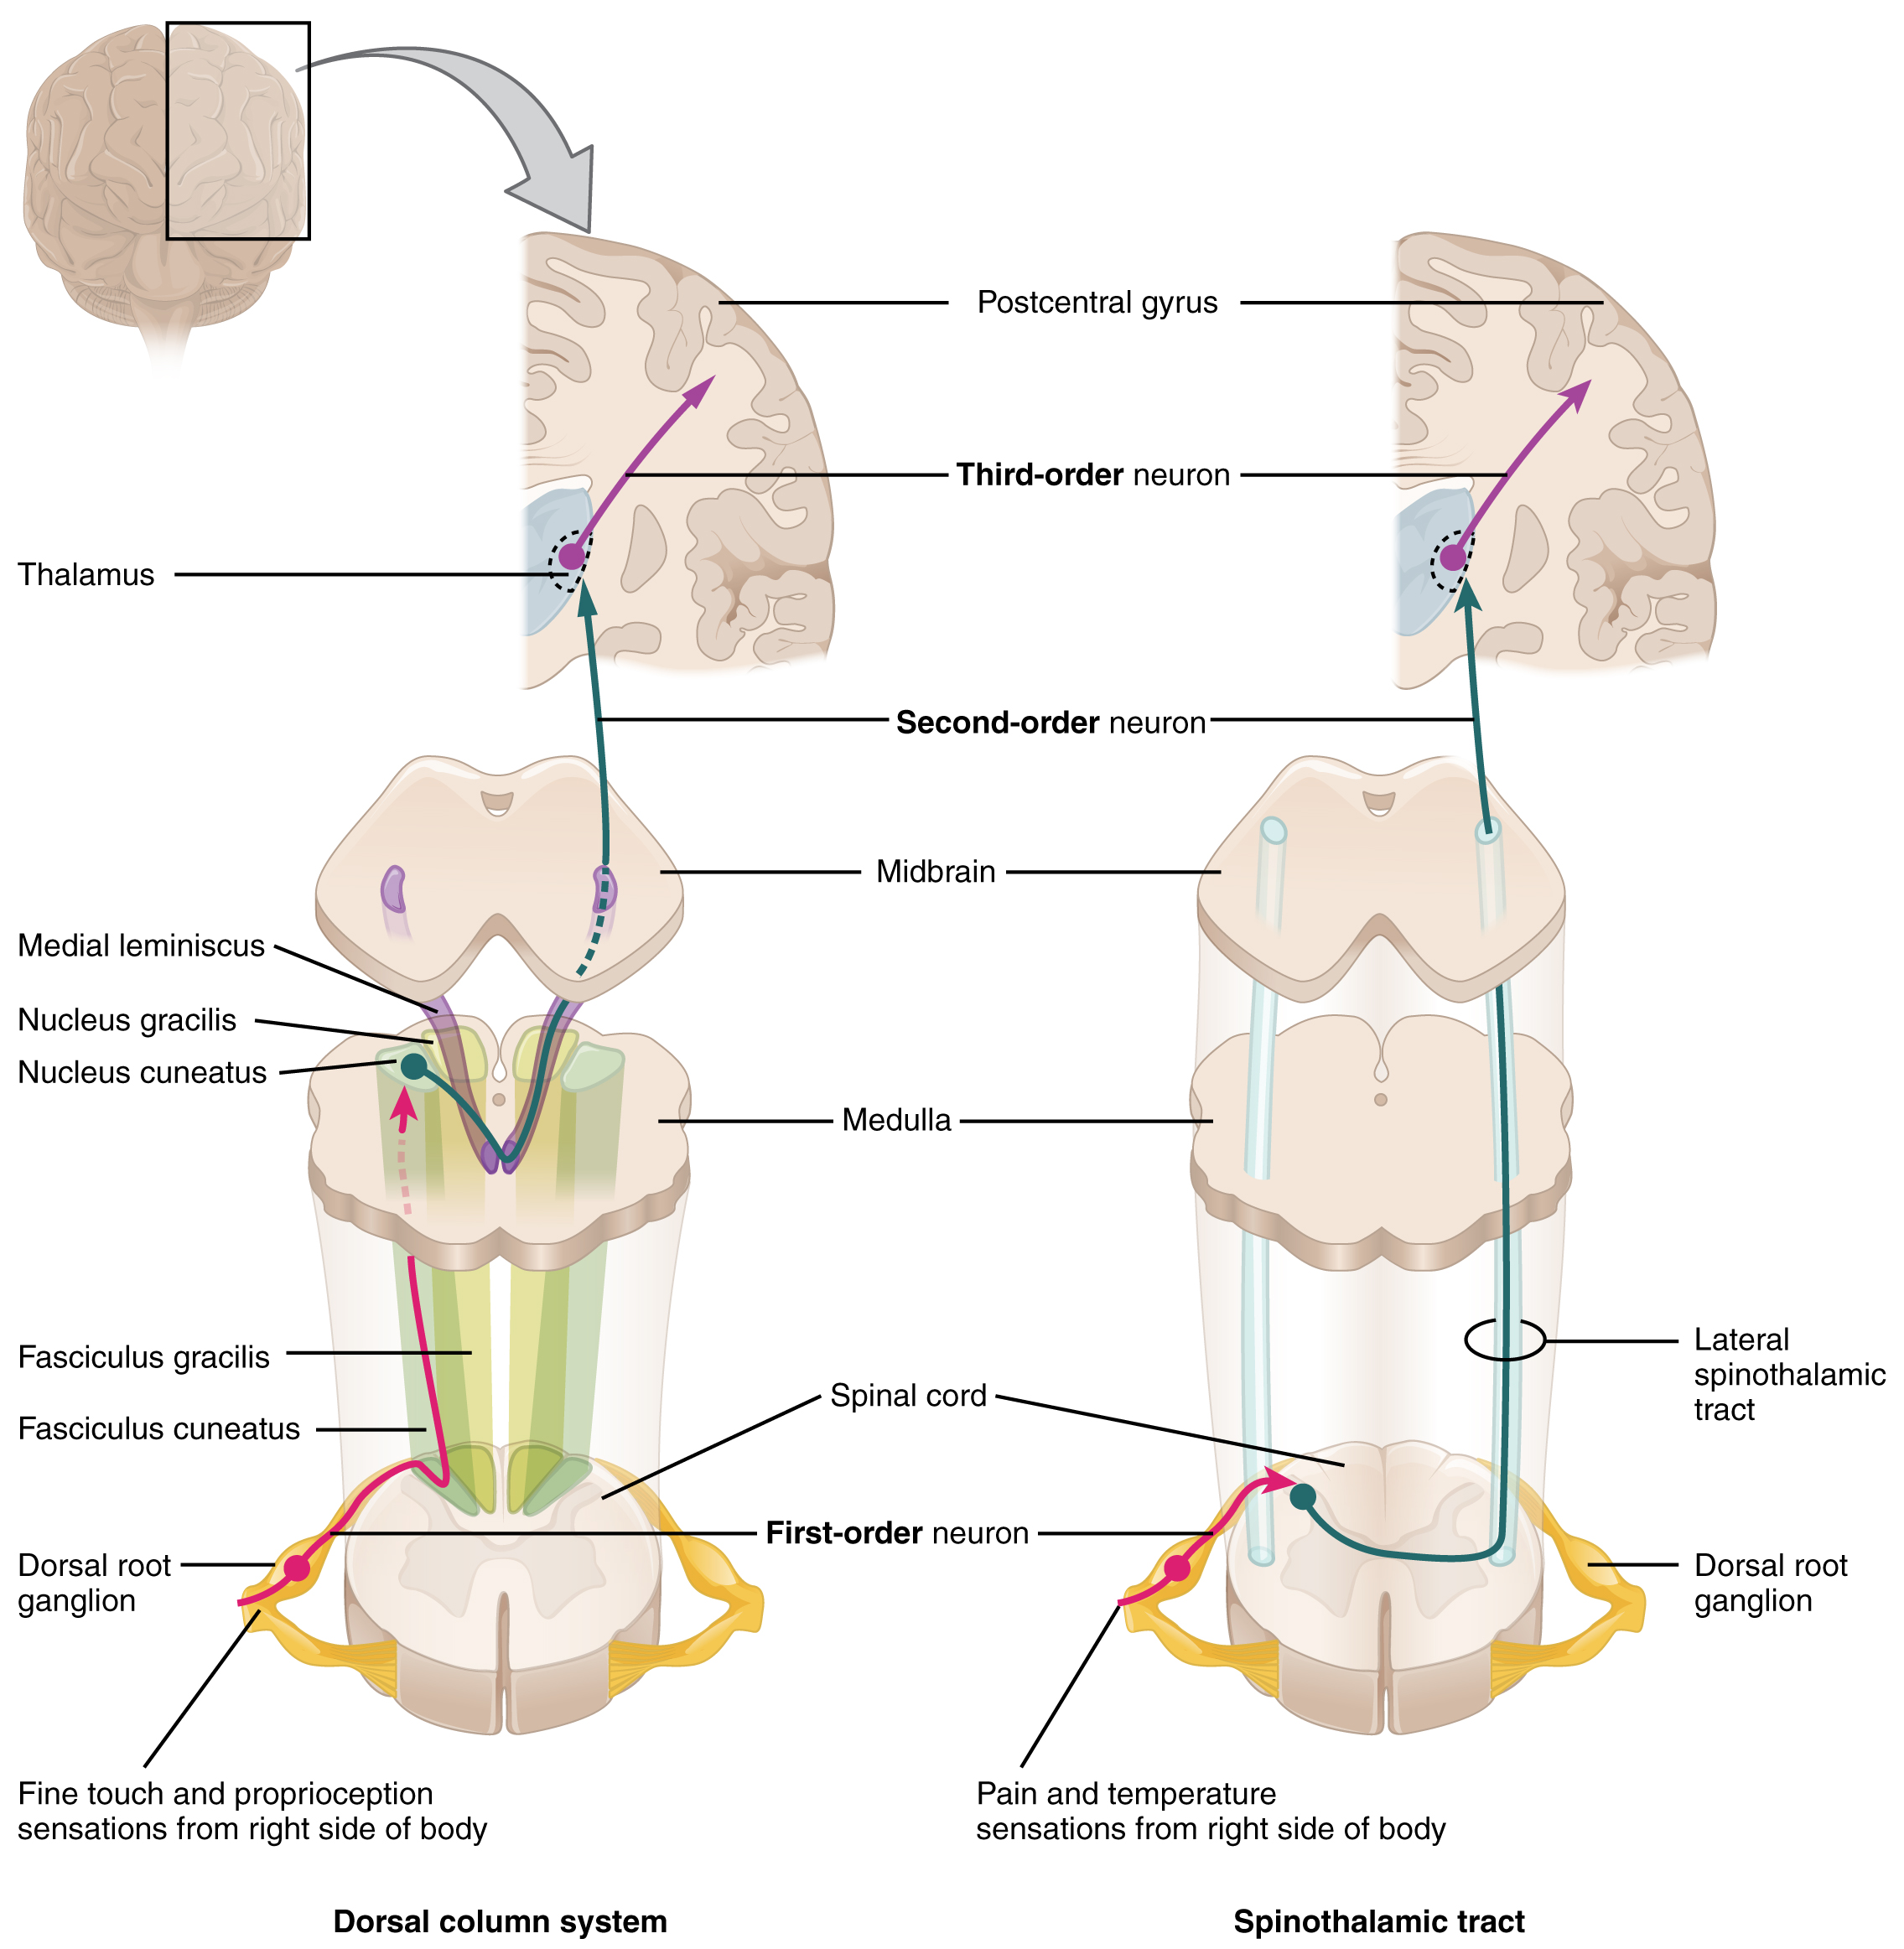 Ascending Pathways of Spinal Cord